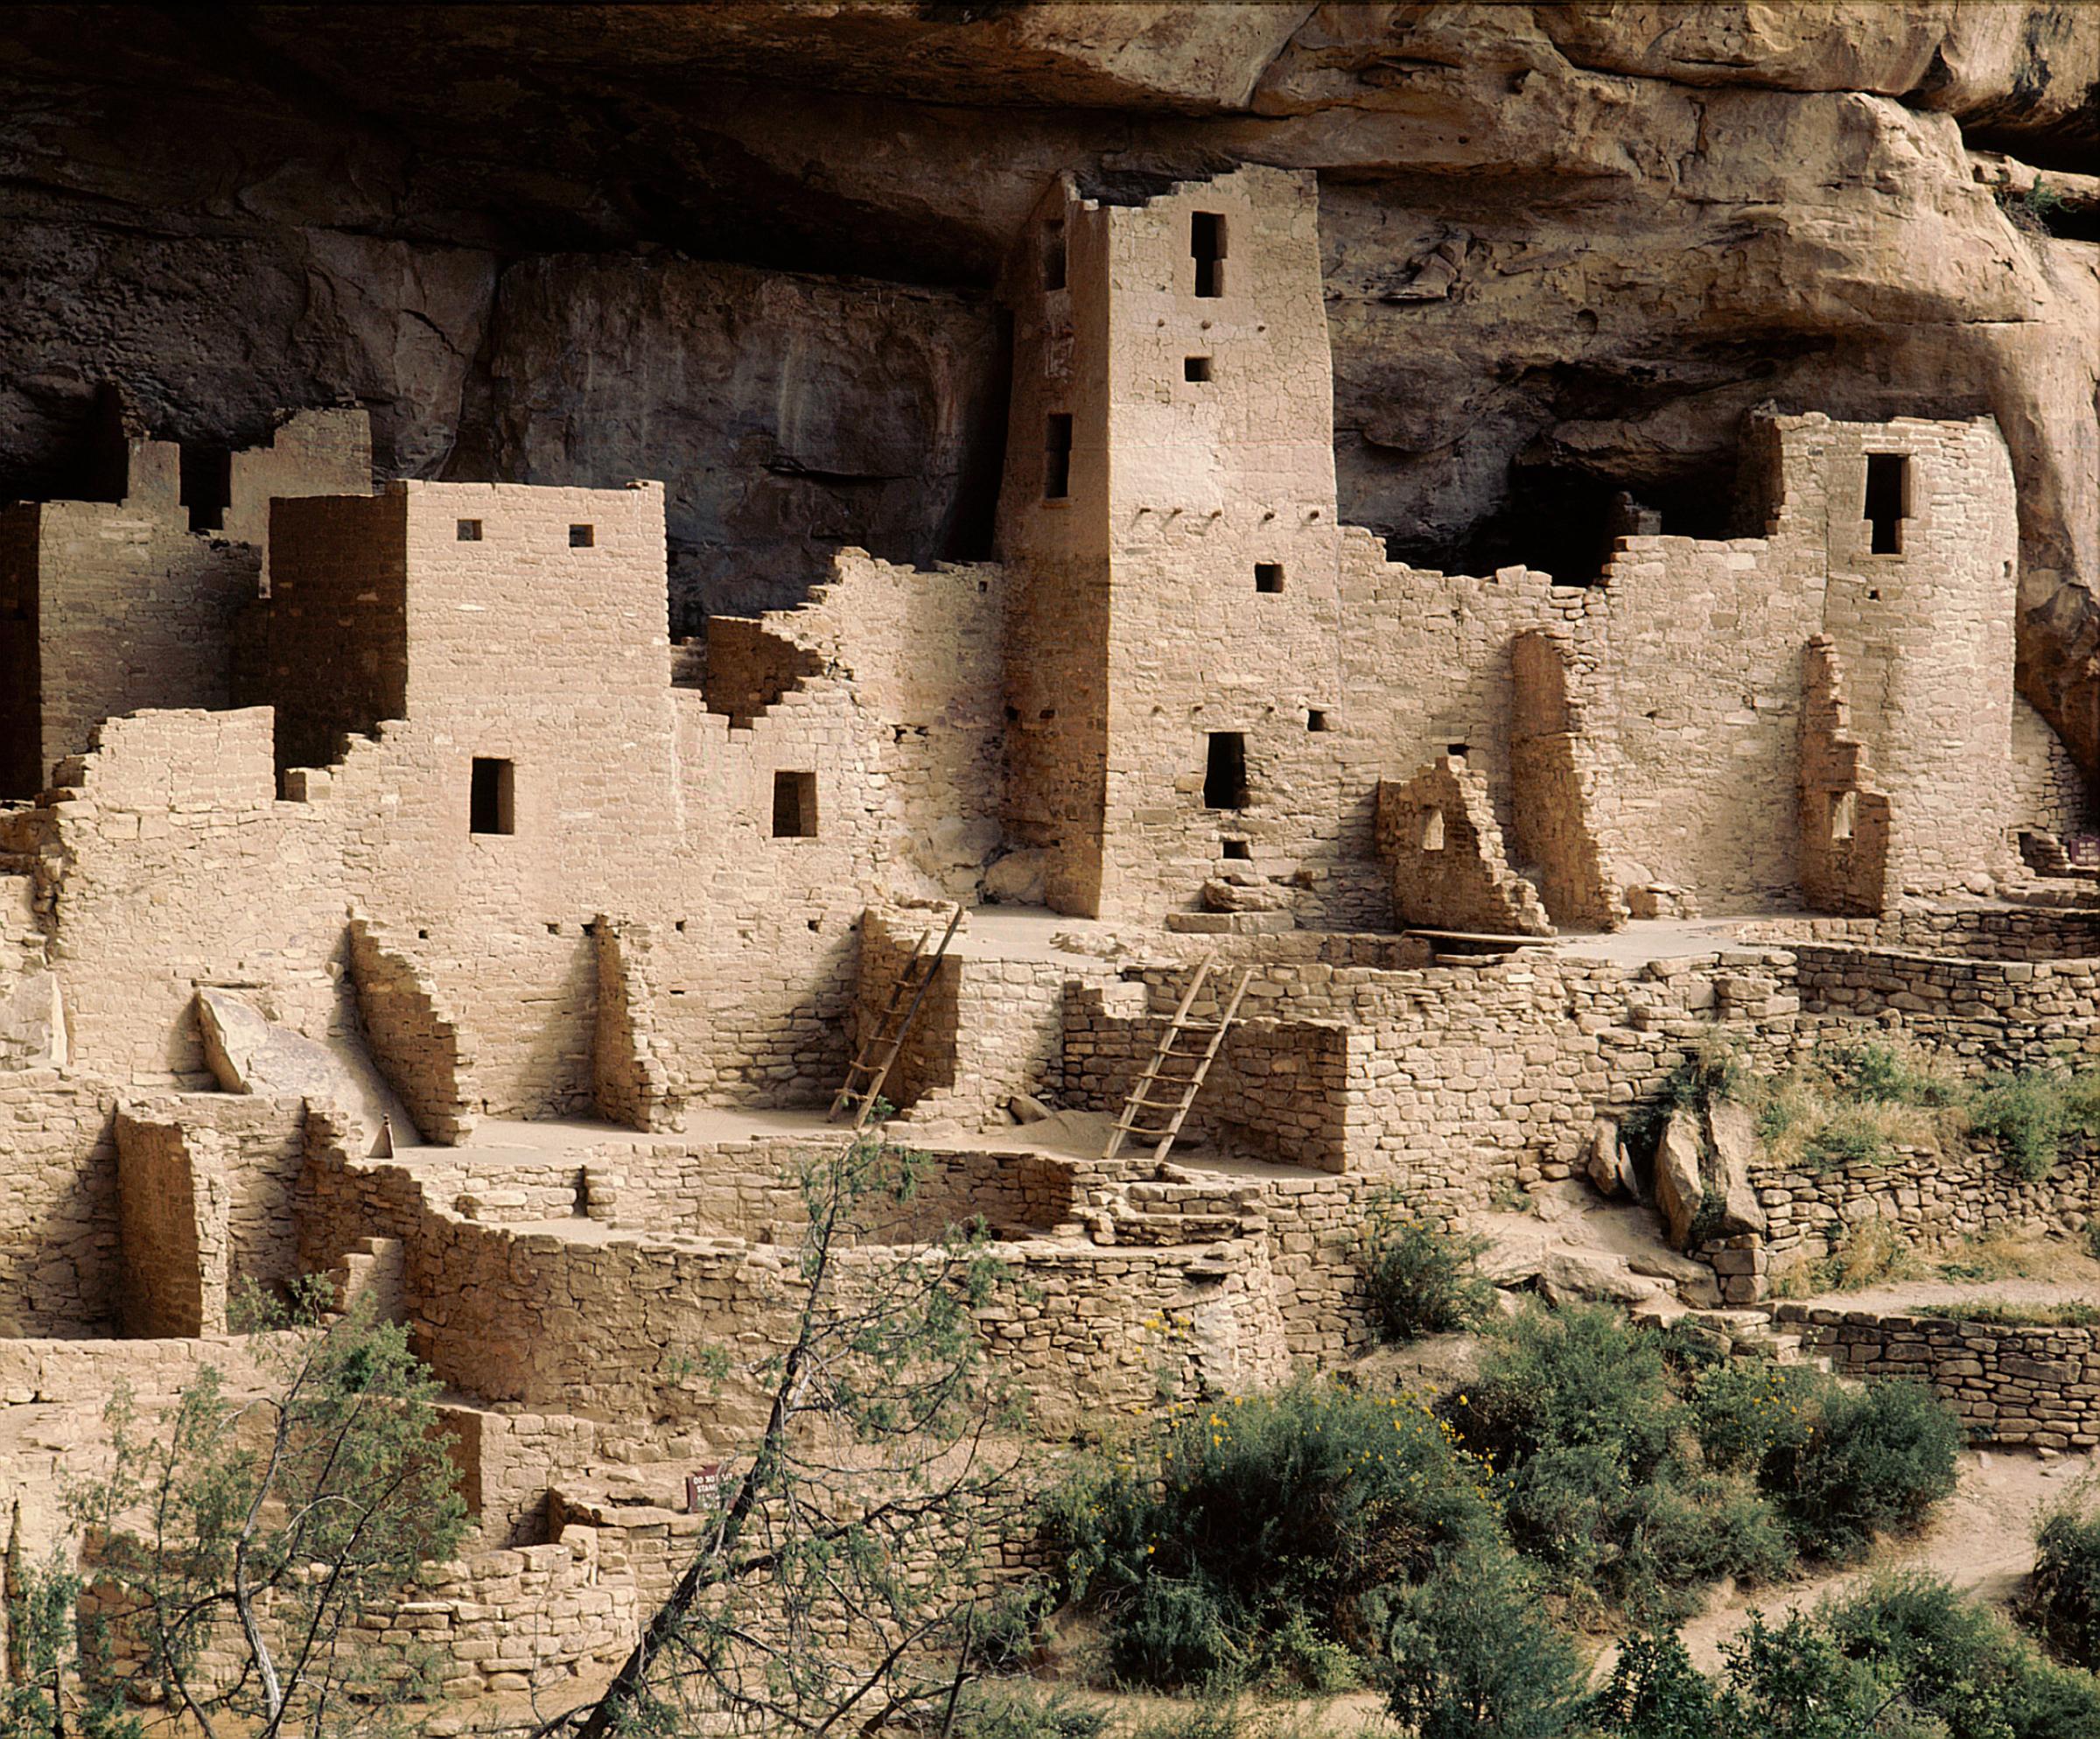 Part of the Cliff Palace at Mesa Verde showing dwellings and kivas, The kivas may be distinguished by their circular shape. USA. Basketmaker and Pueblo. 12th c AD. Colorado.